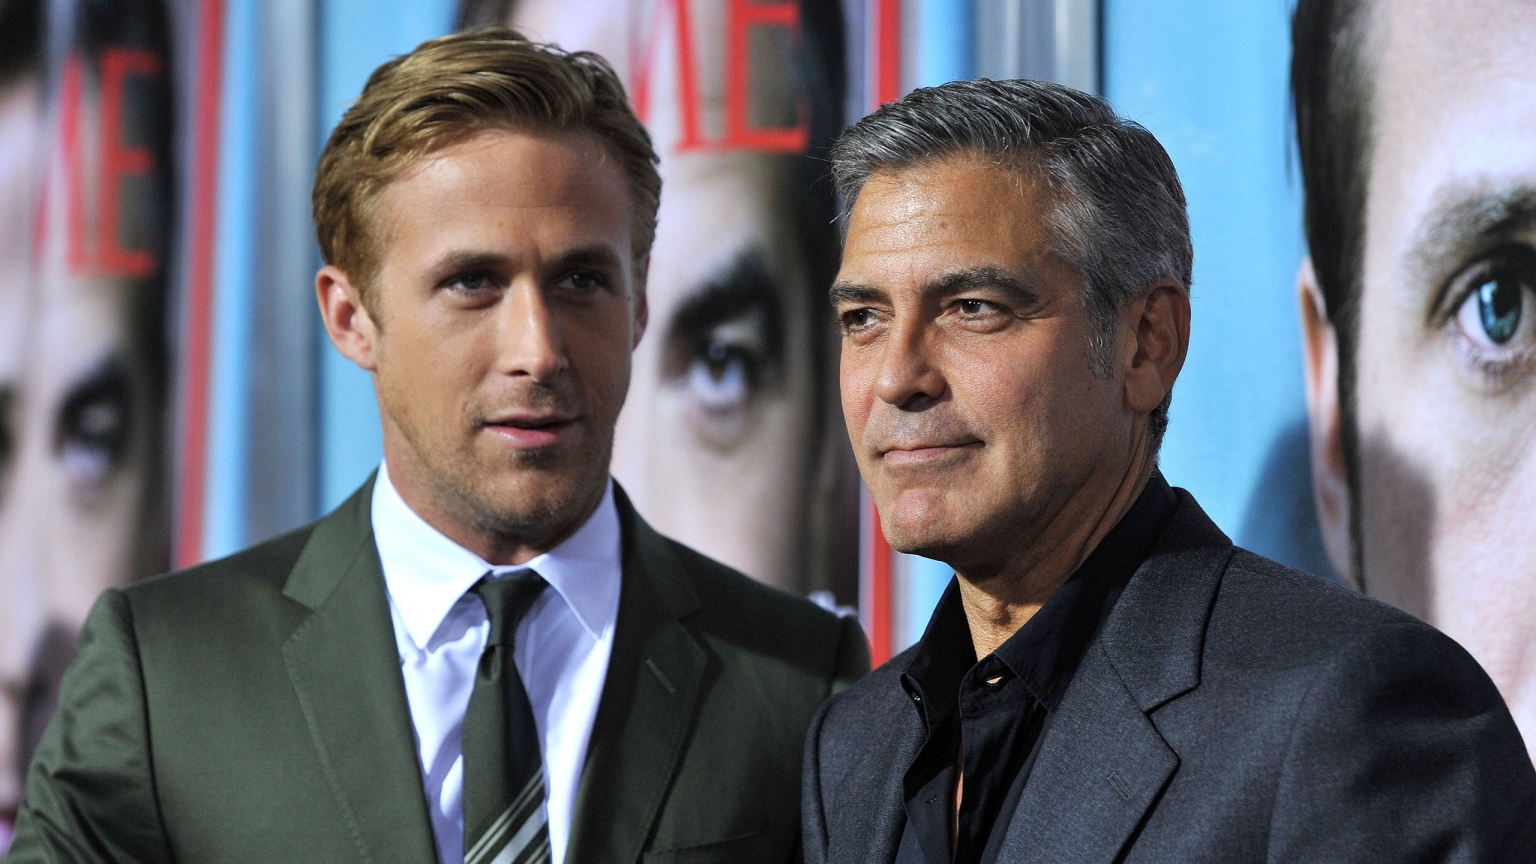 George Clooney and Ryan Gosling for 1536 x 864 HDTV resolution